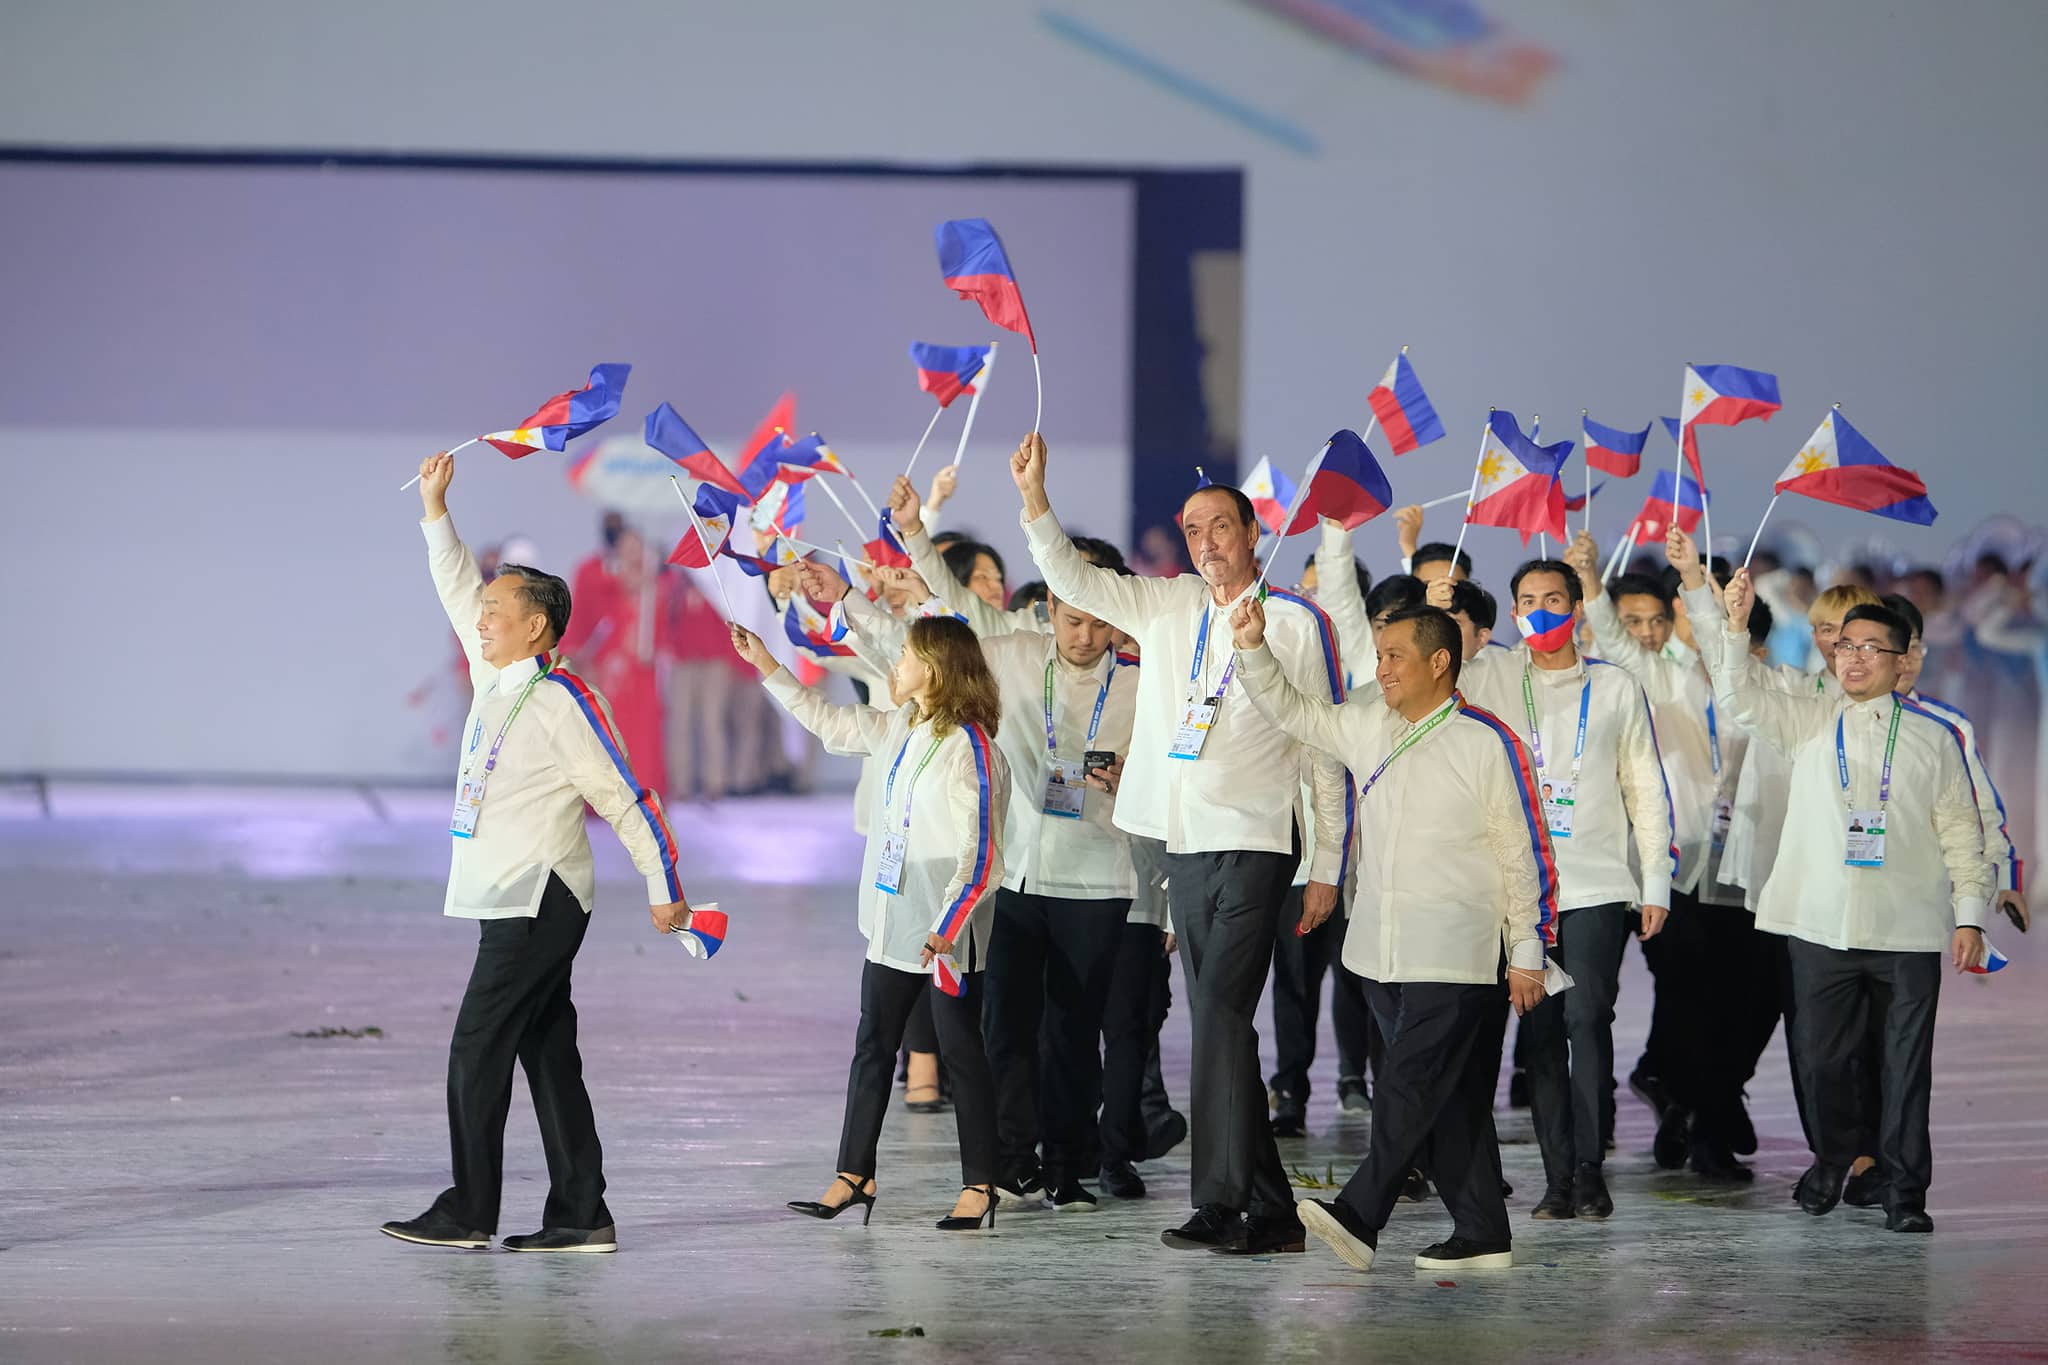 Philippine delegates wave during the opening ceremony of the 31st Southeast Asian (SEA) Games at My Dinh National Stadium in Hanoi, Vietnam, May 12, 2022. Photo: Nam Tran / Tuoi Tre